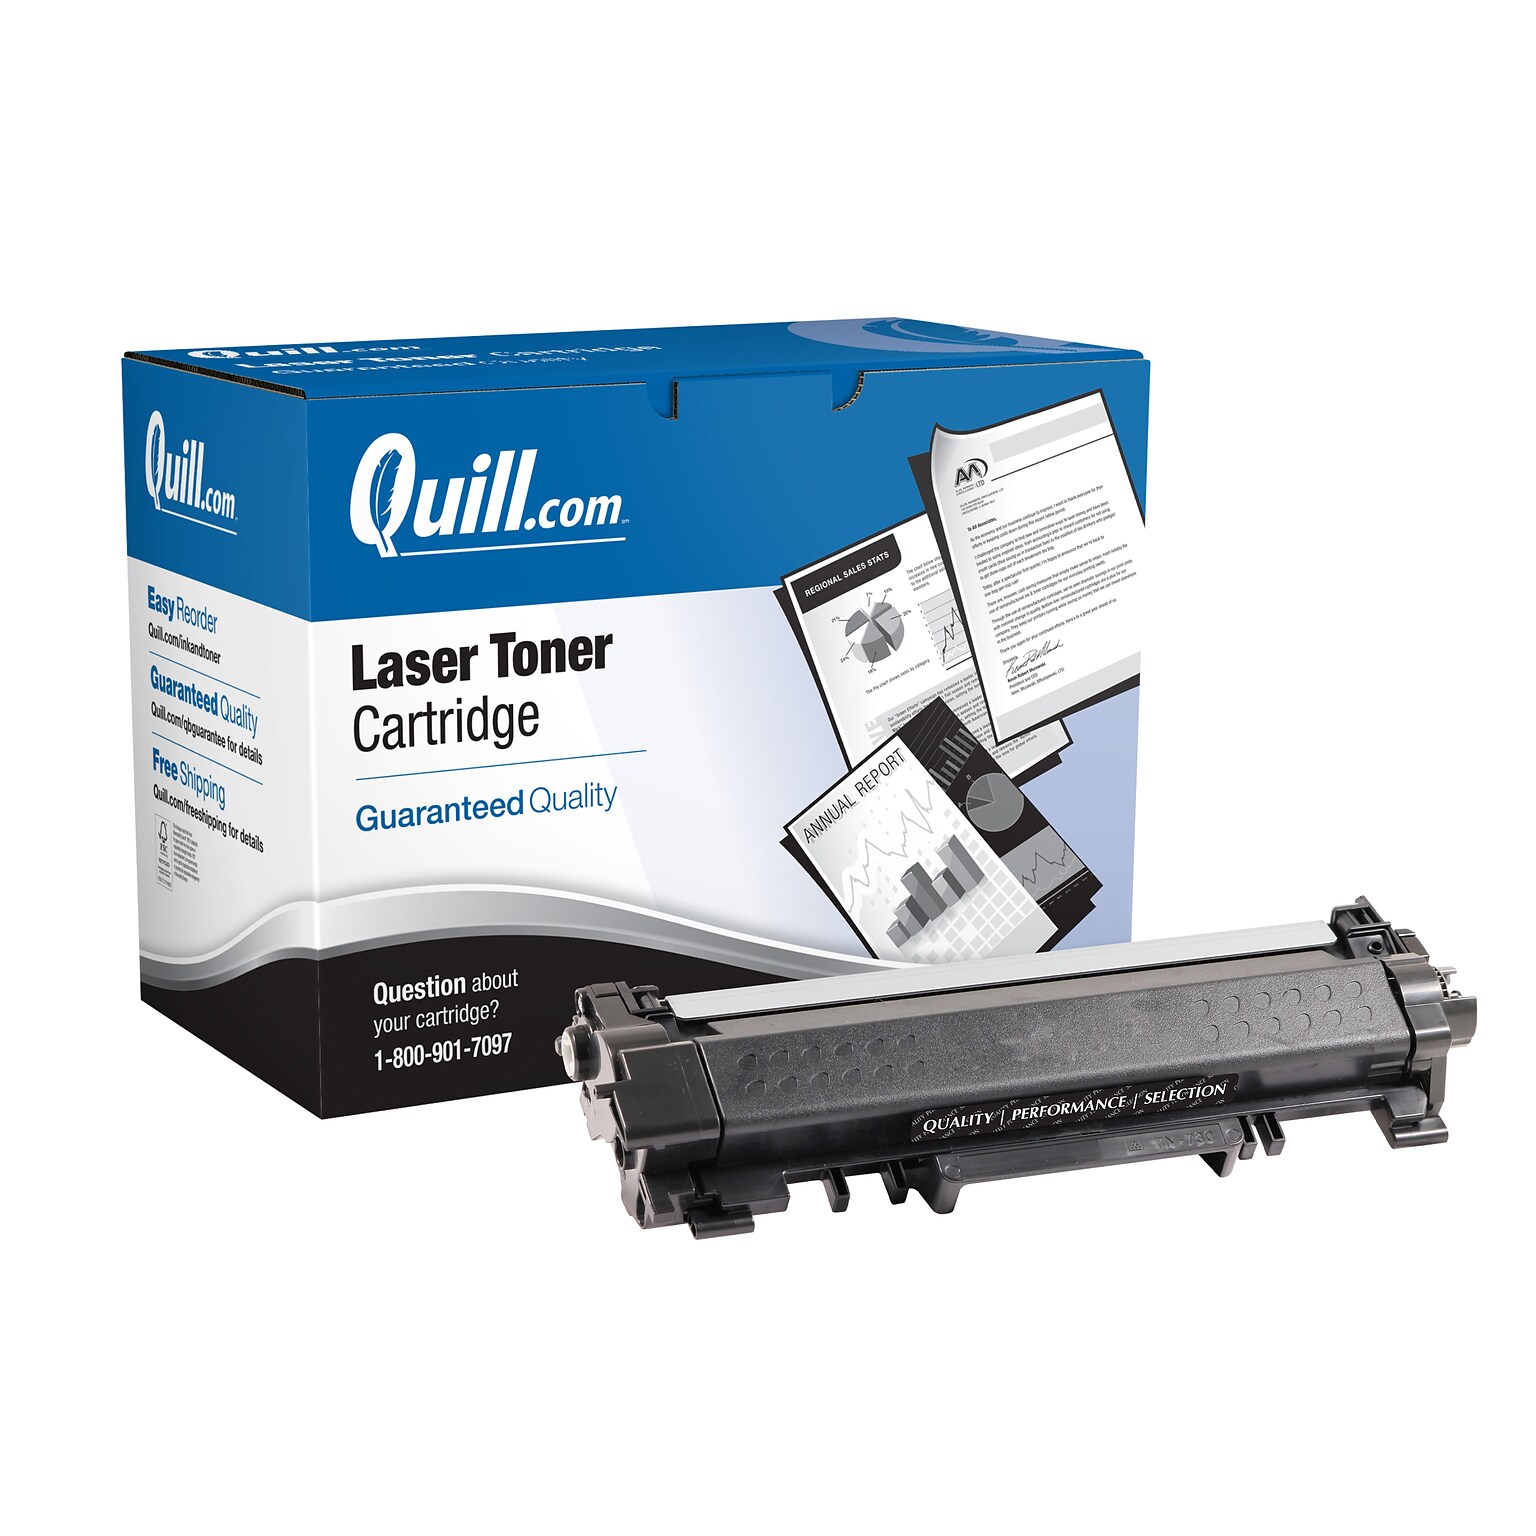 Quill Brand® Brother TN770 Remanufactured Black Laser Toner Cartridge, Super High Yield (TN770)